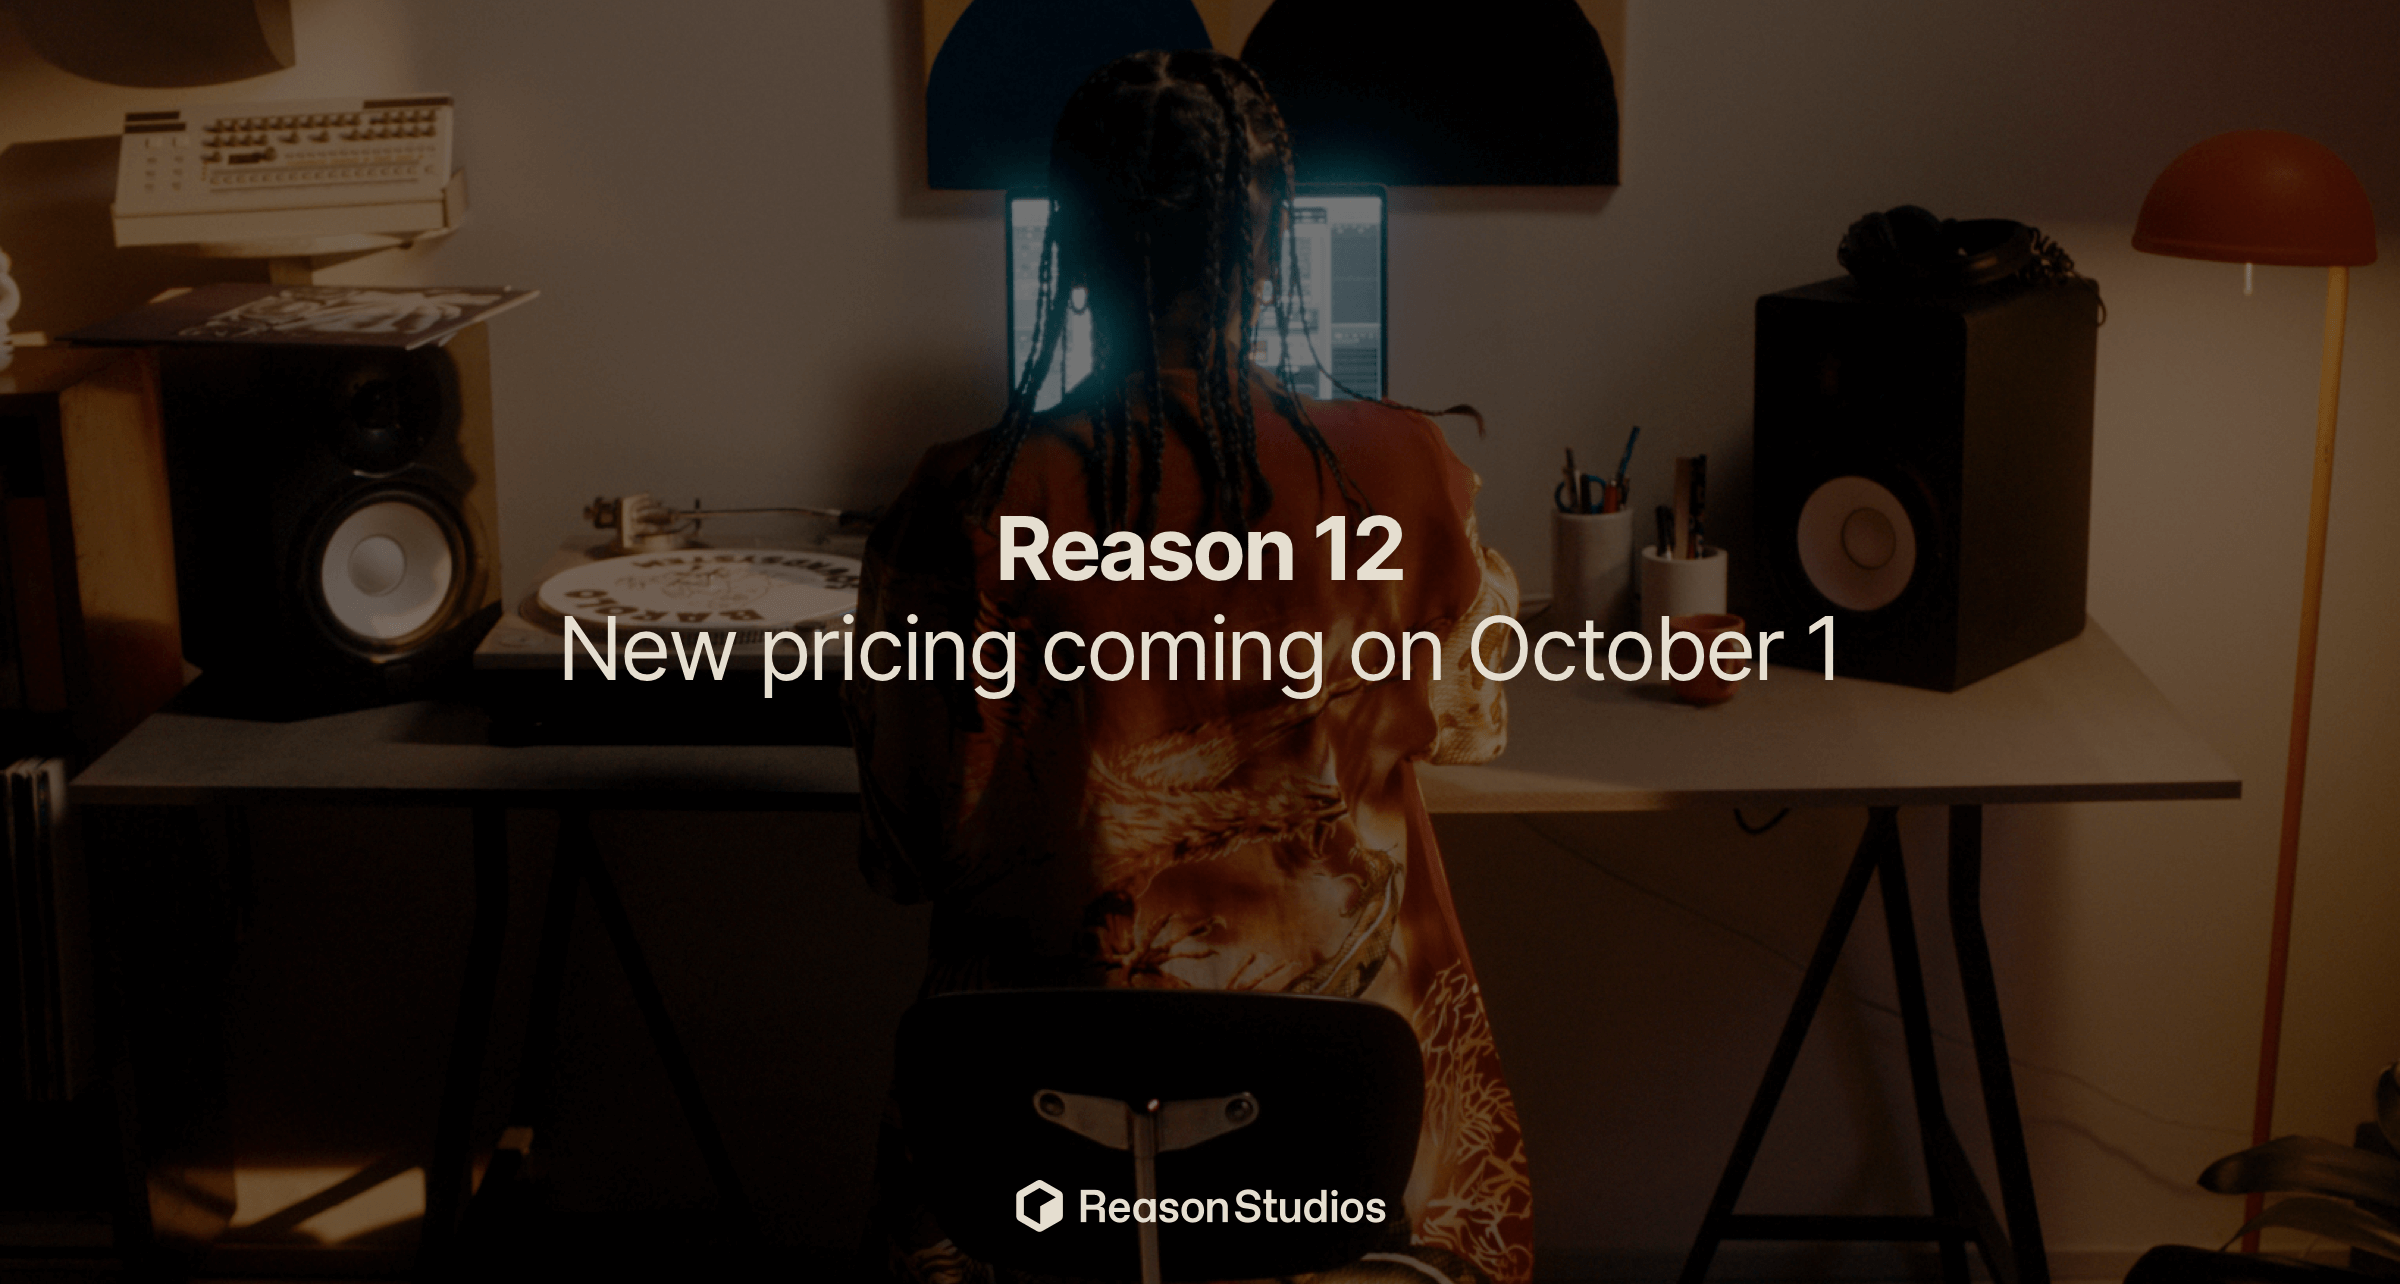 Reason 12: New pricing coming on October 1